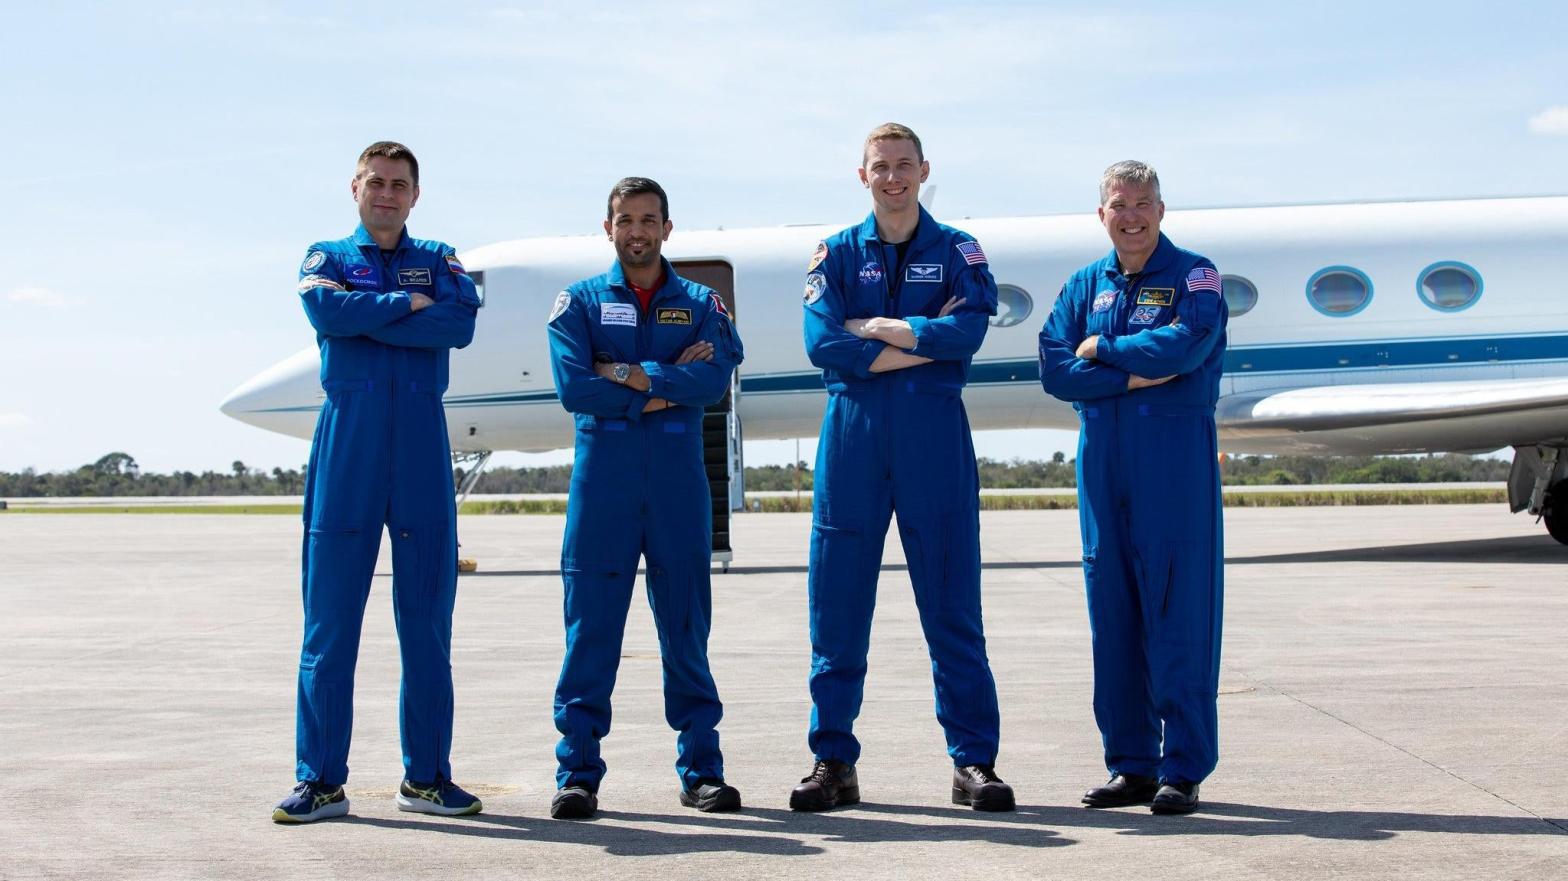 The Crew-6 astronauts arriving at Kennedy Space Centre's Launch and Landing Facility in Florida on February 21. (Photo: NASA/Kim Shiflett)